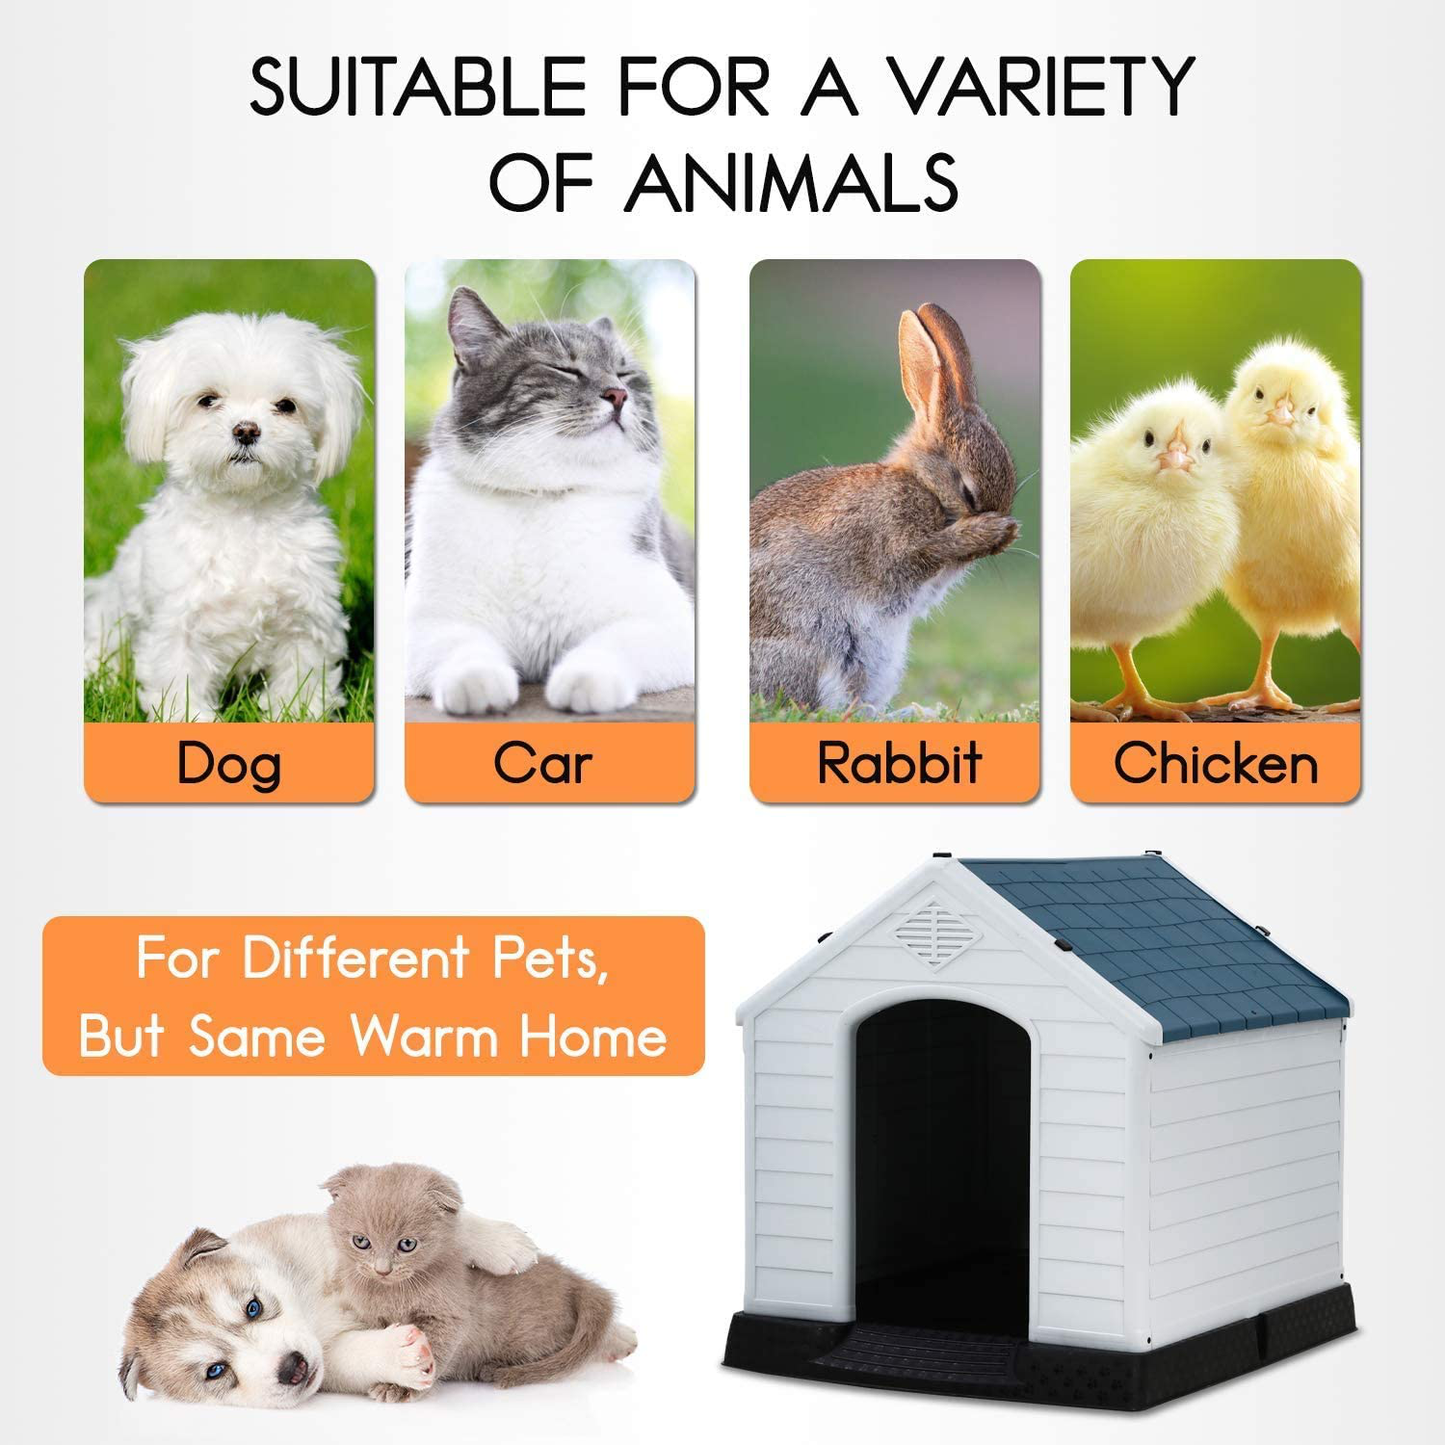 Dog House Doghouse House for Large Dog Large Dog House Dog Houses for Large Dogs Small Dog House Pet House Dog House Outdoor All Weather Dog House, with Base Support for Winter Tough Durable House